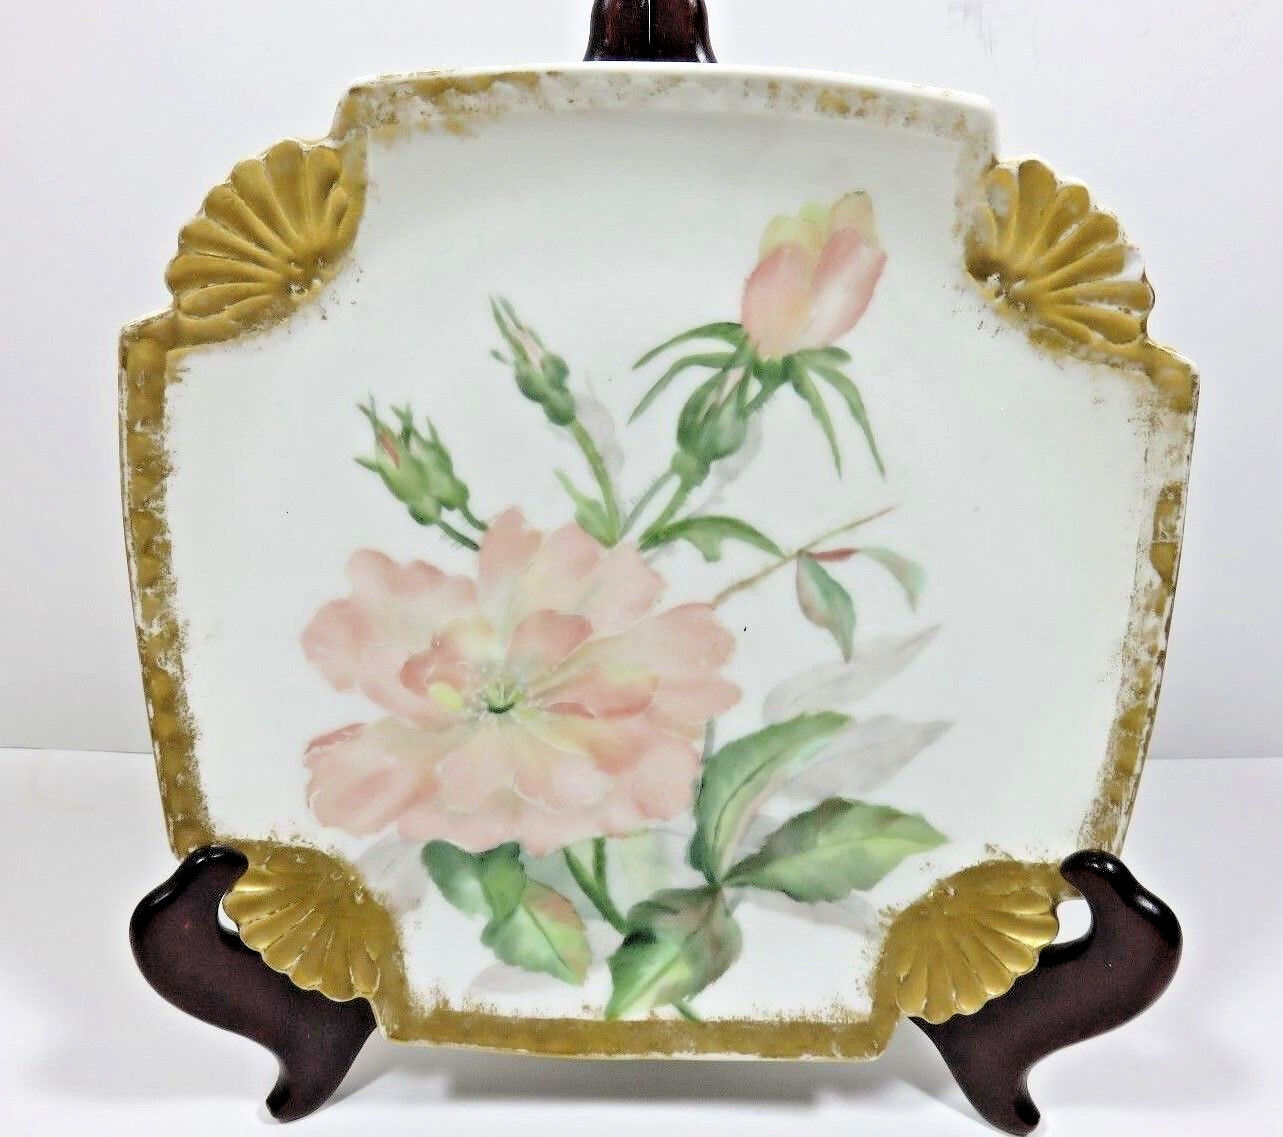  Hand Painted Porcelain Square Serving Dish circa 1889 Europe